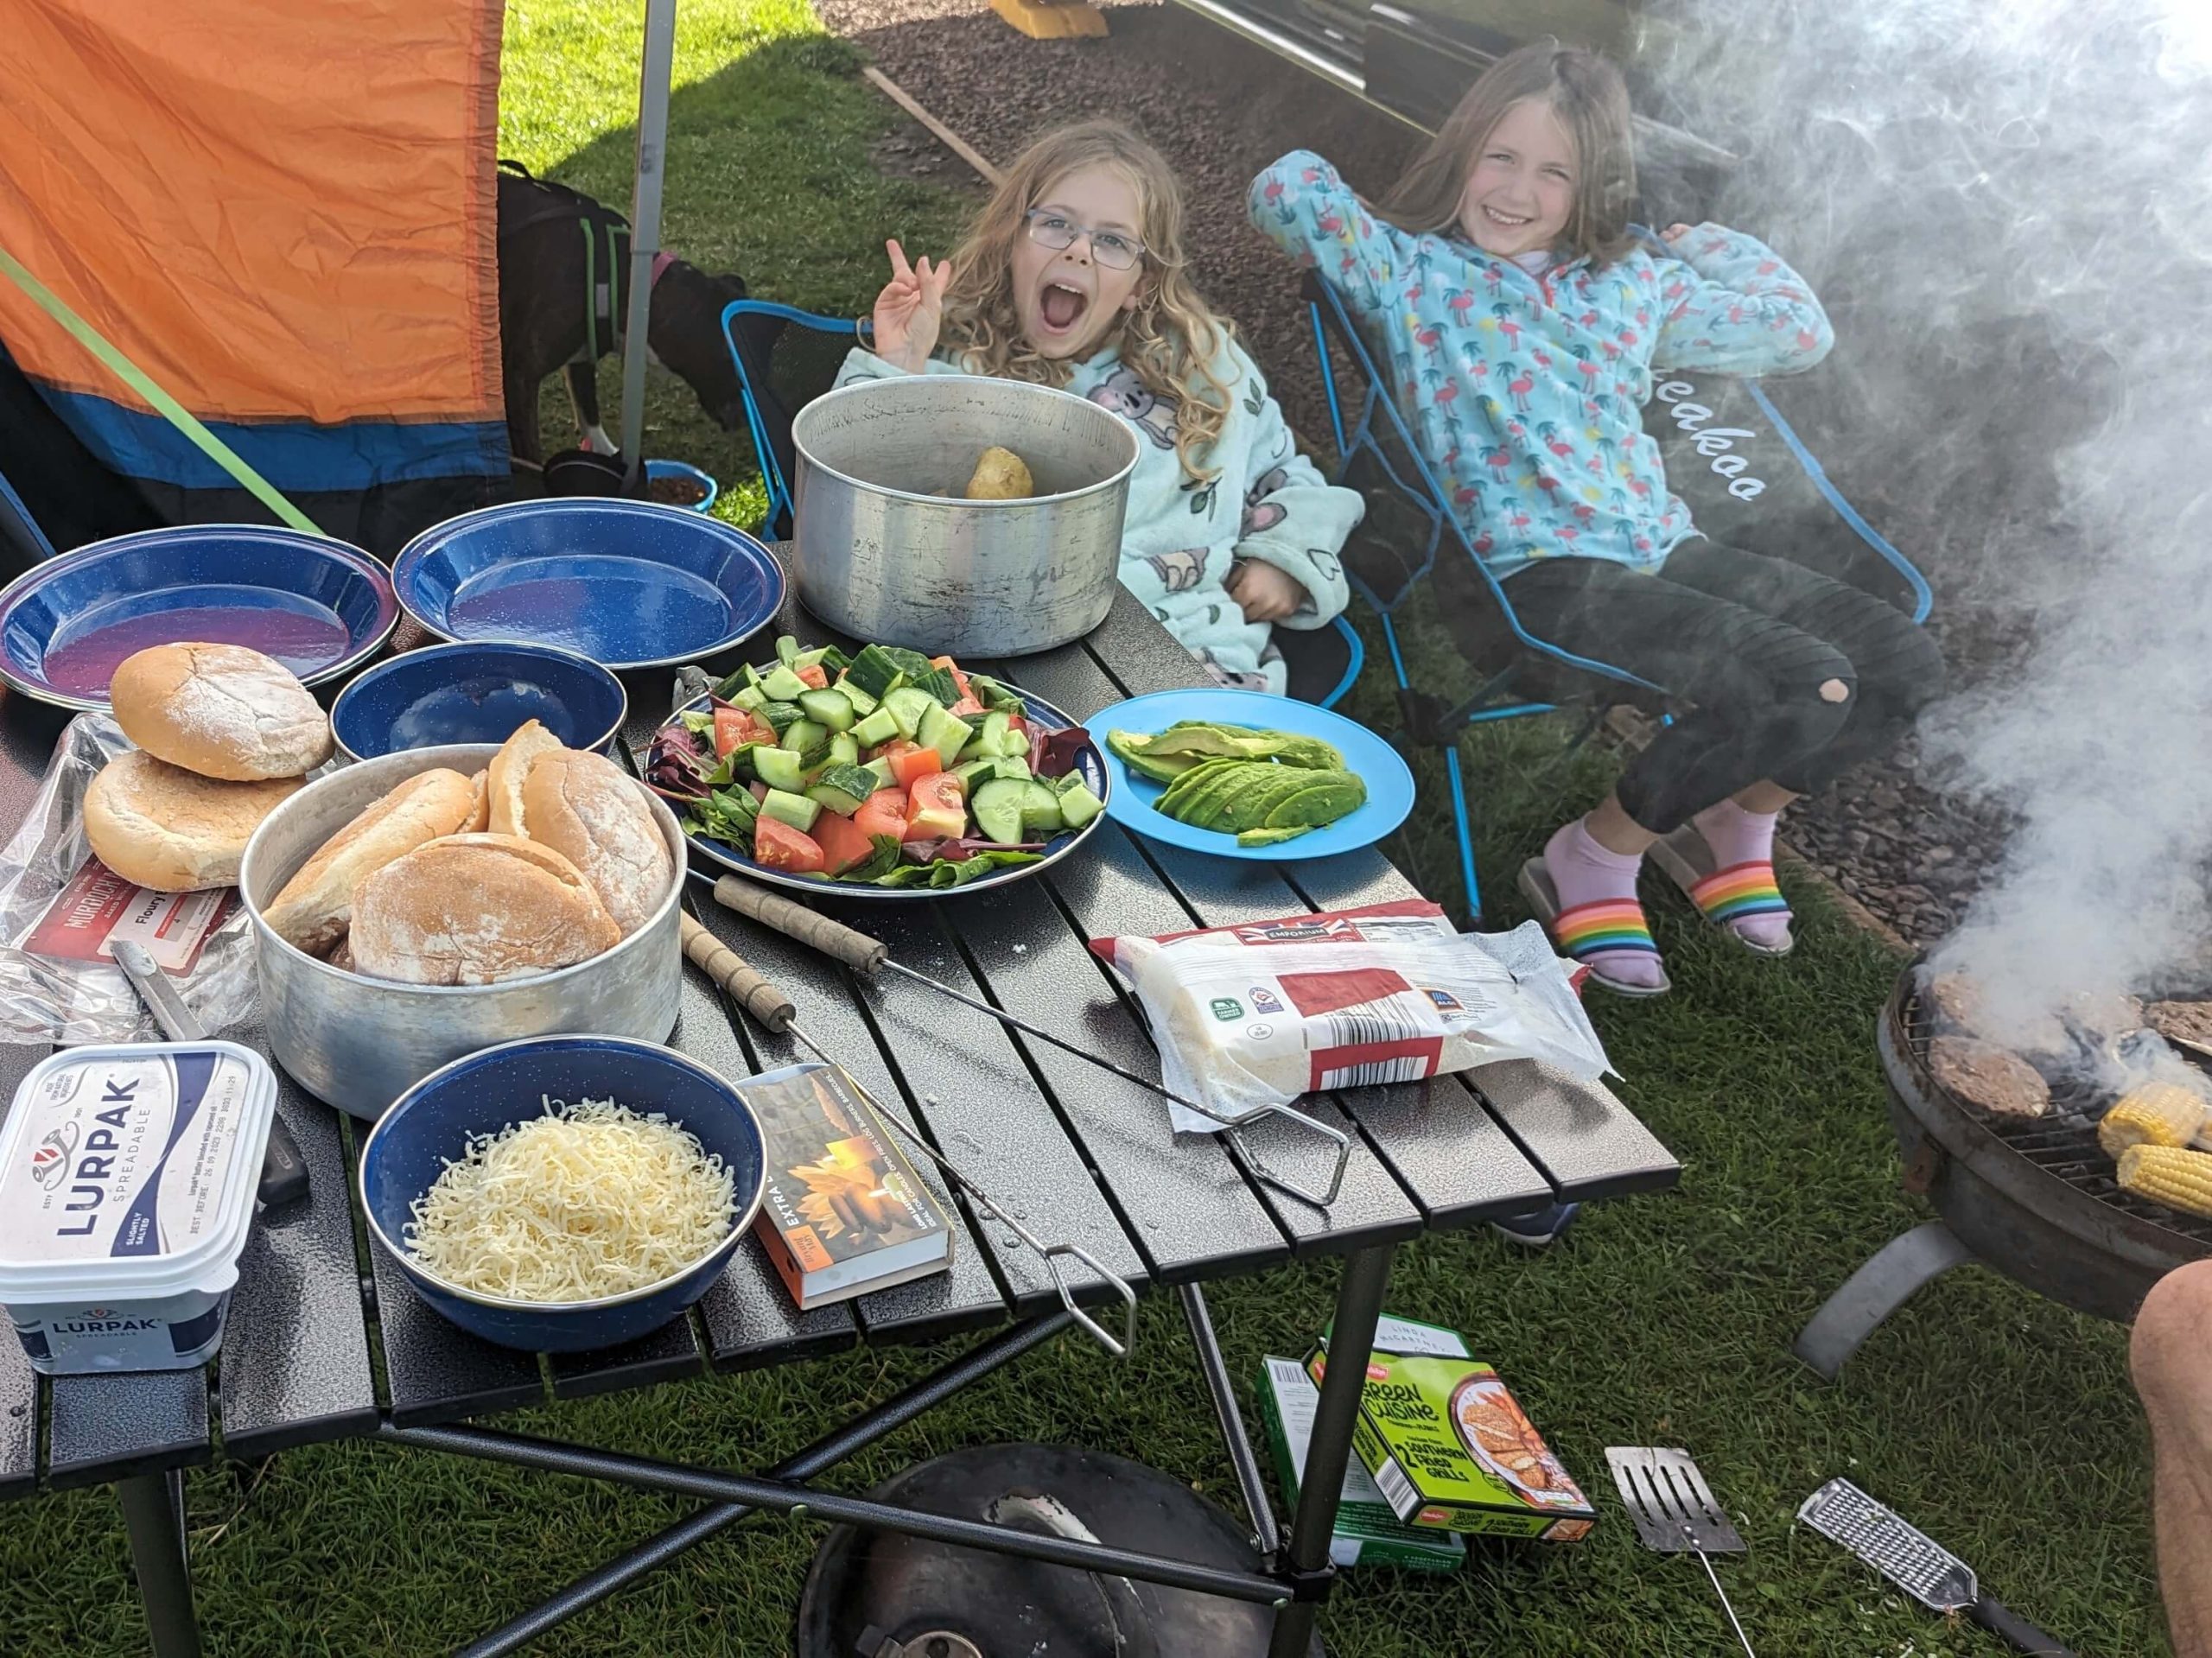 Two girls smiling sitting by a folding camping table with food on and BBQ smoke to left hand side of image